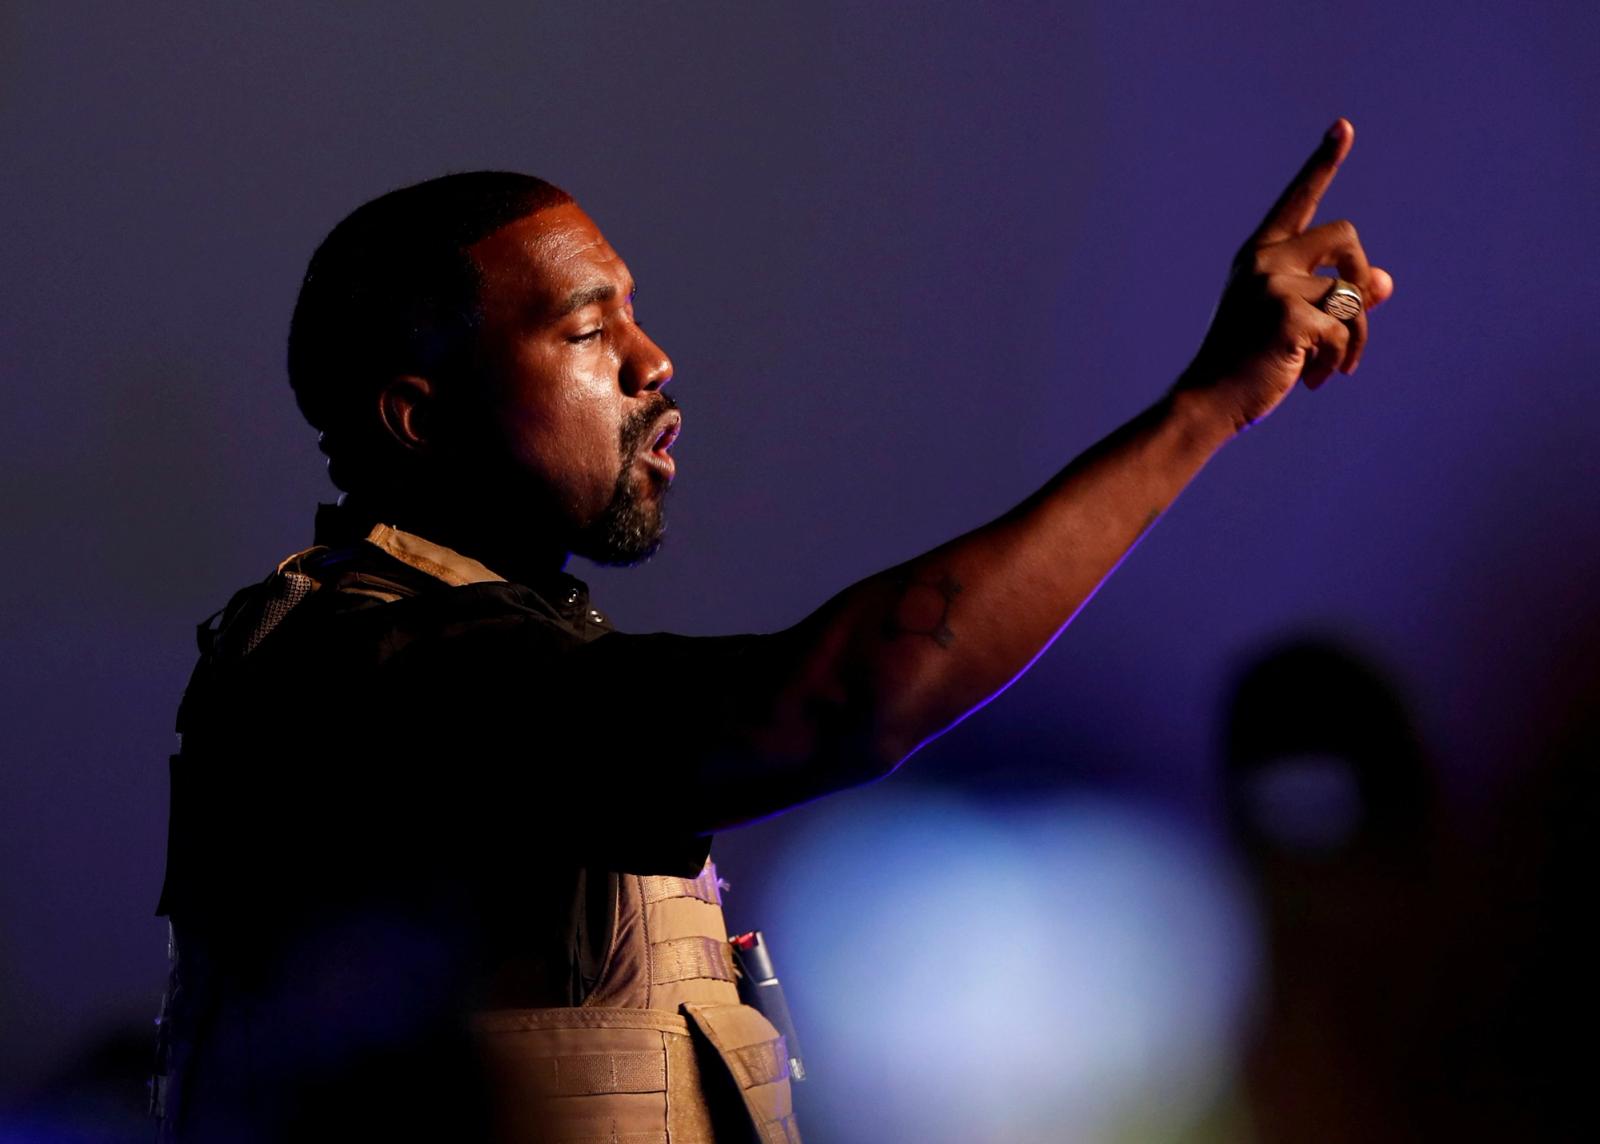 Kanye West holds a first rally in support of his presidential bid on July 19, 2020.